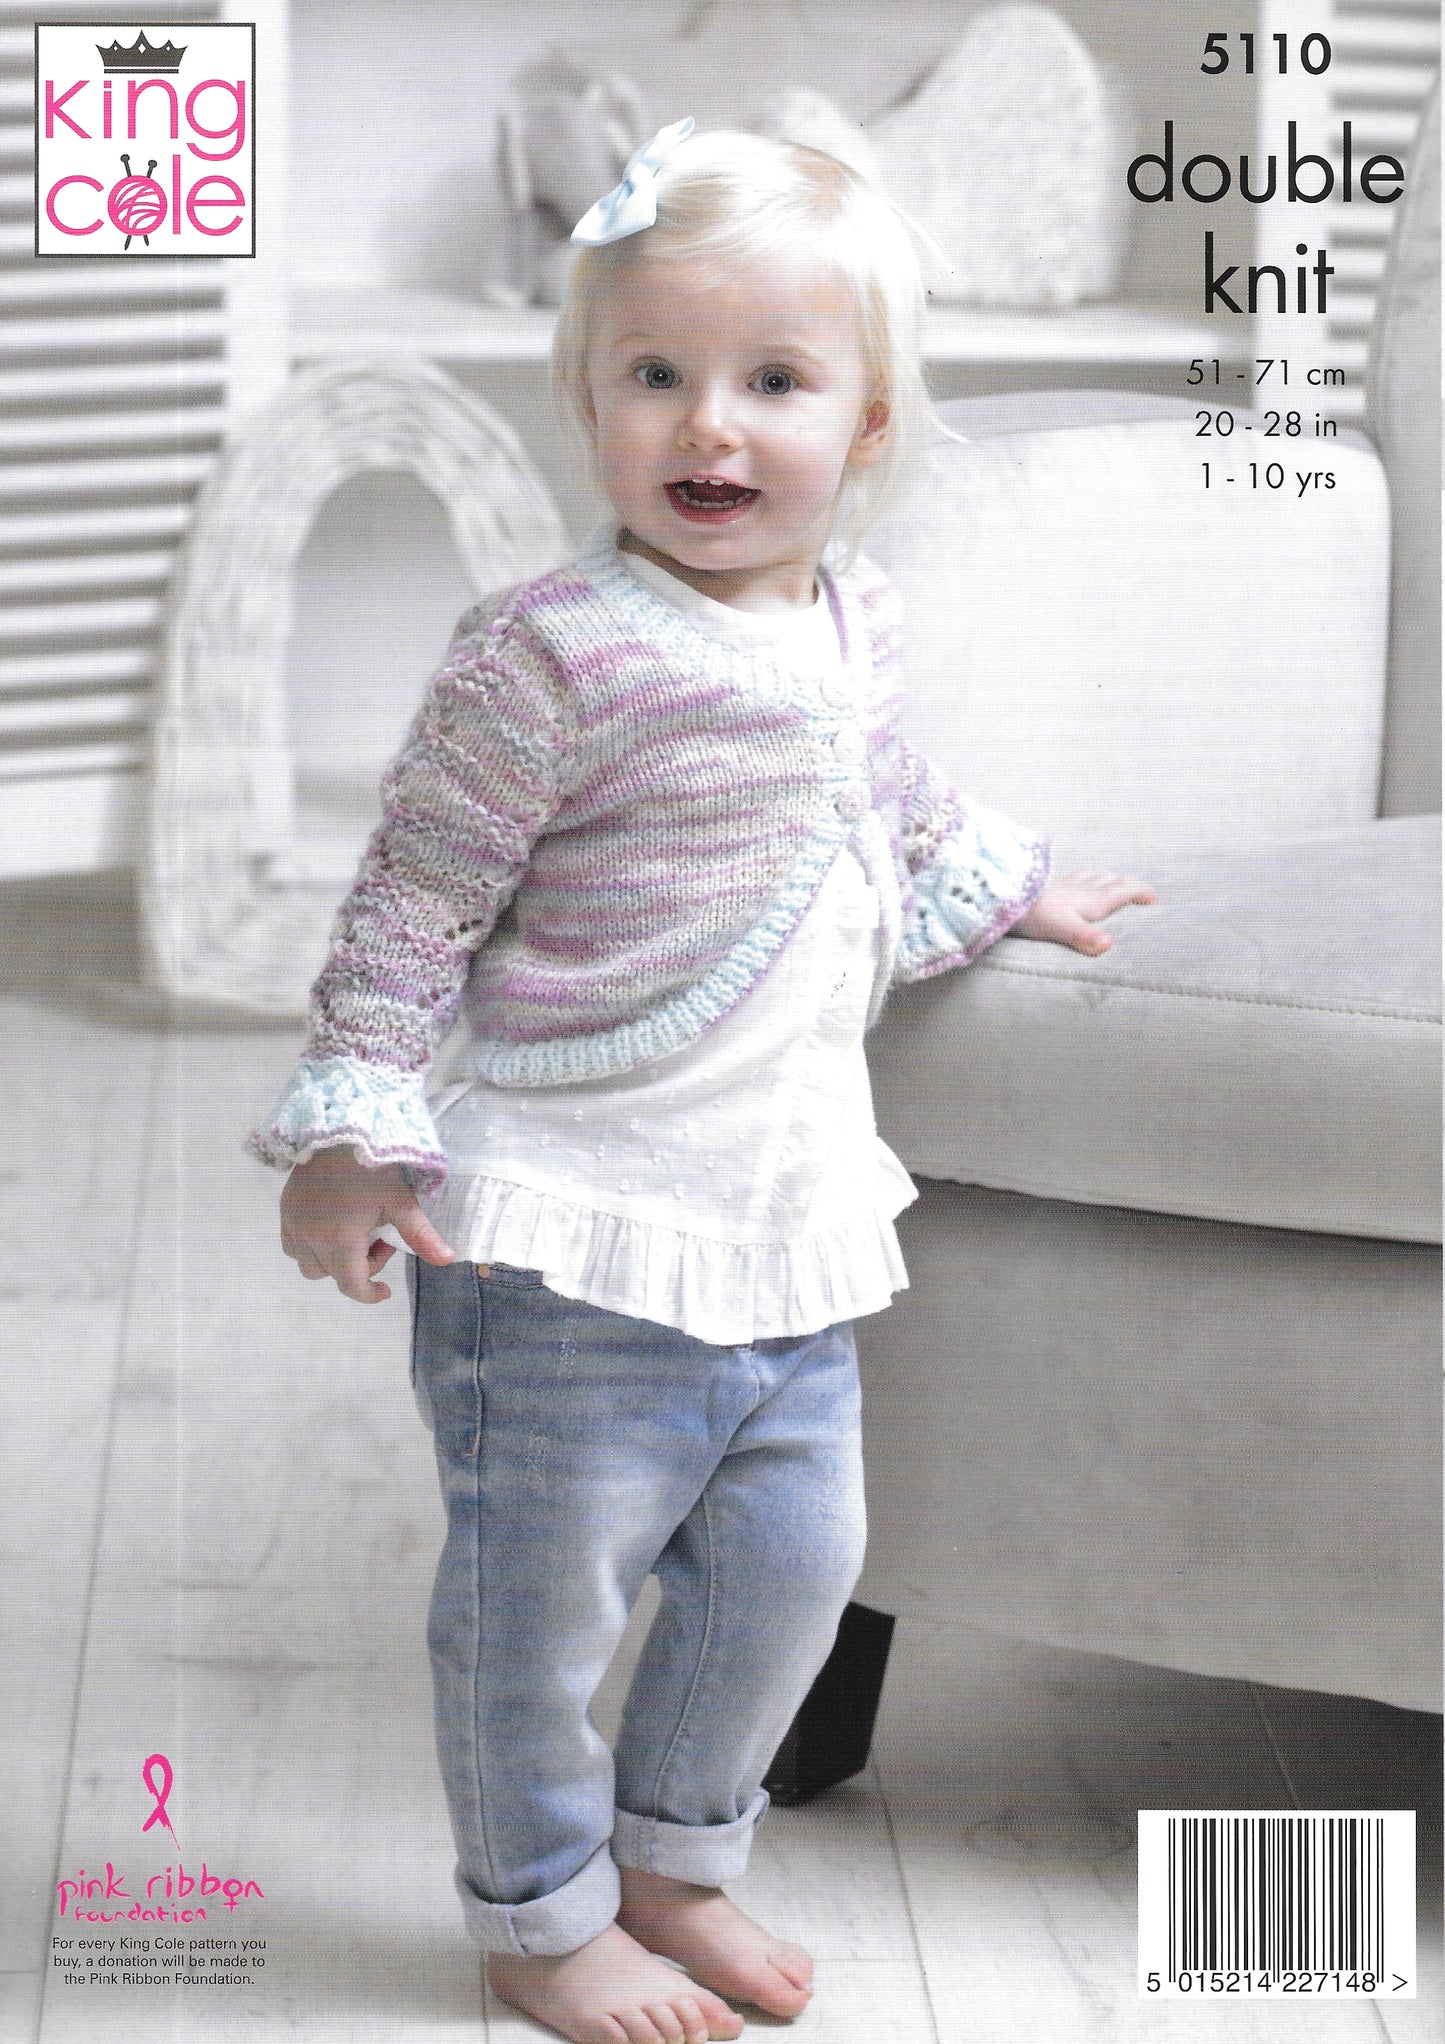 5110 King Cole double knit Sweater/Pullover knitting pattern